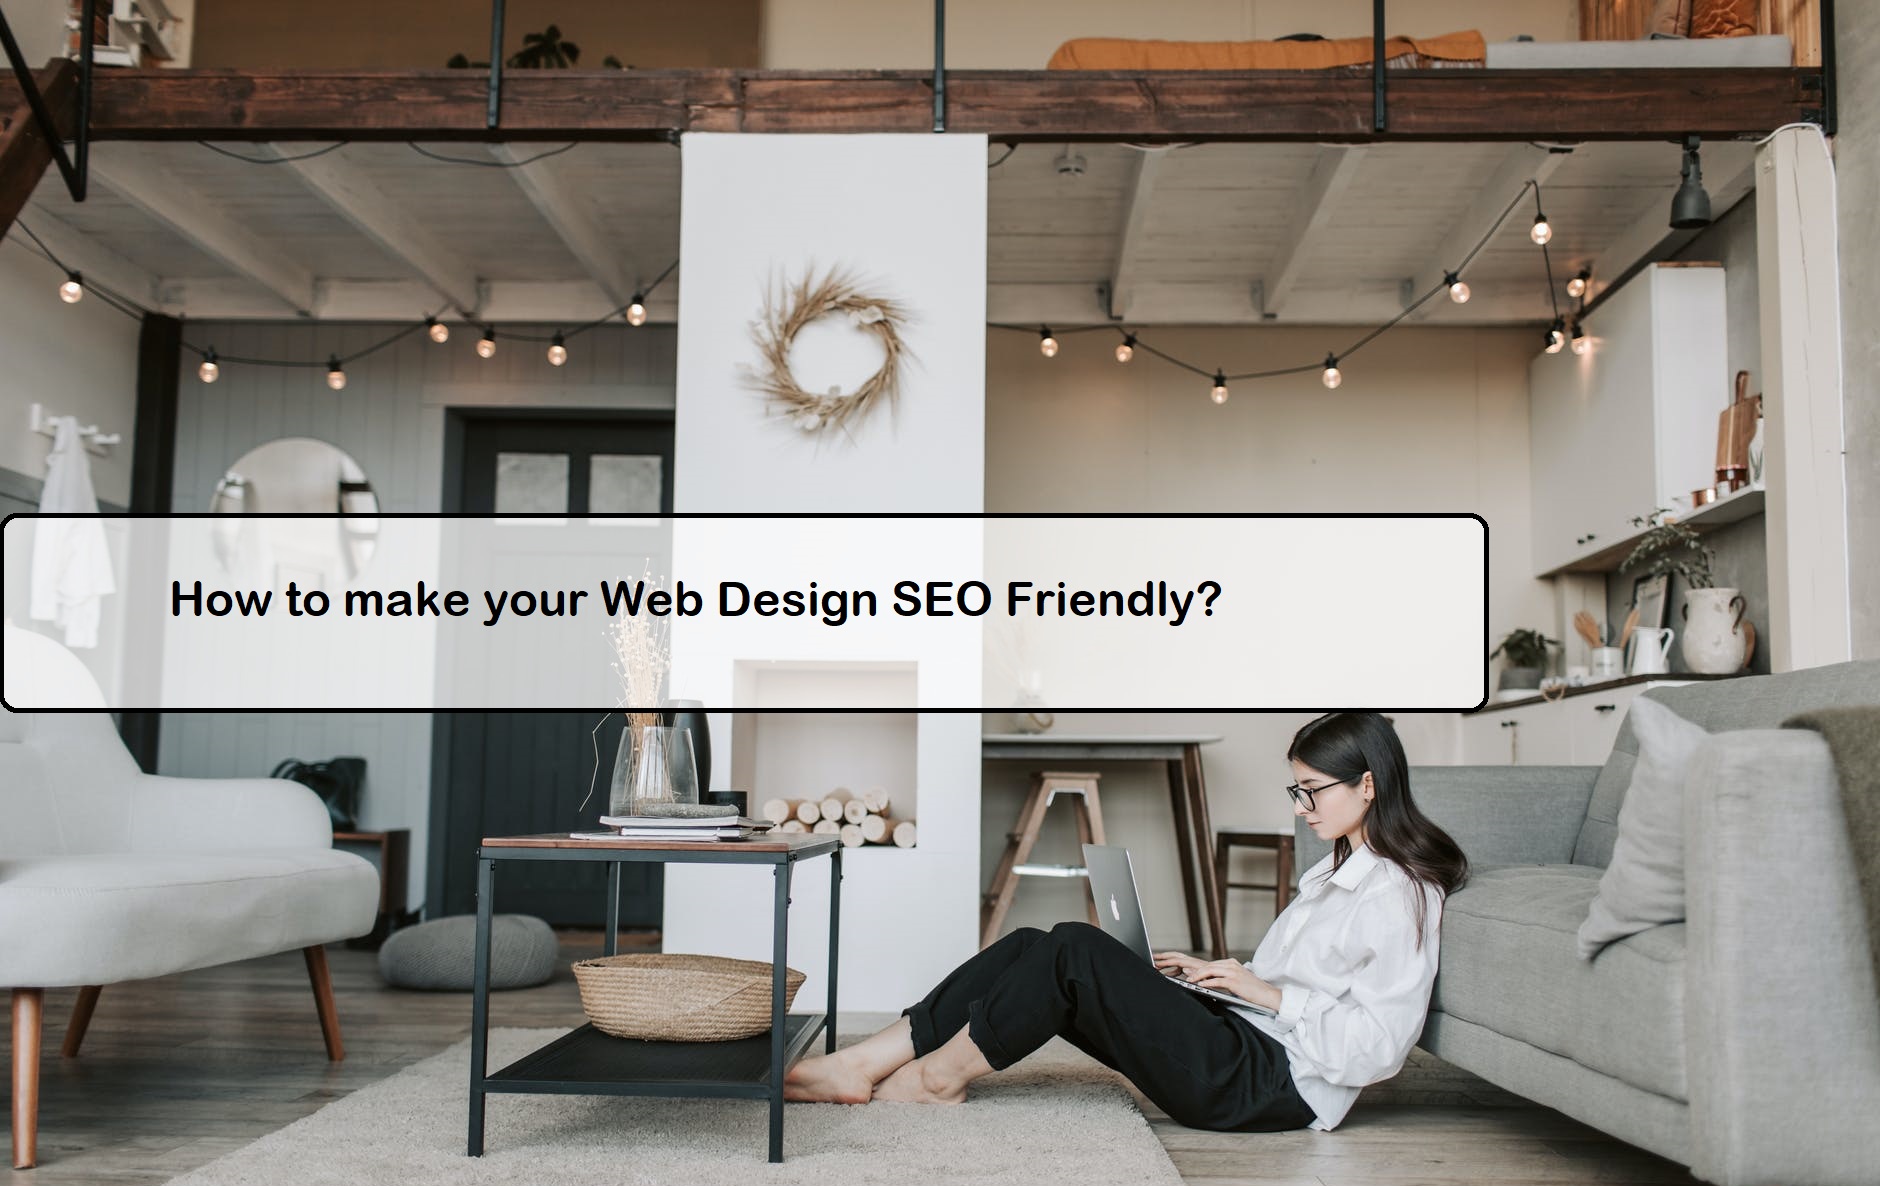 How to make your Web Design SEO Friendly?